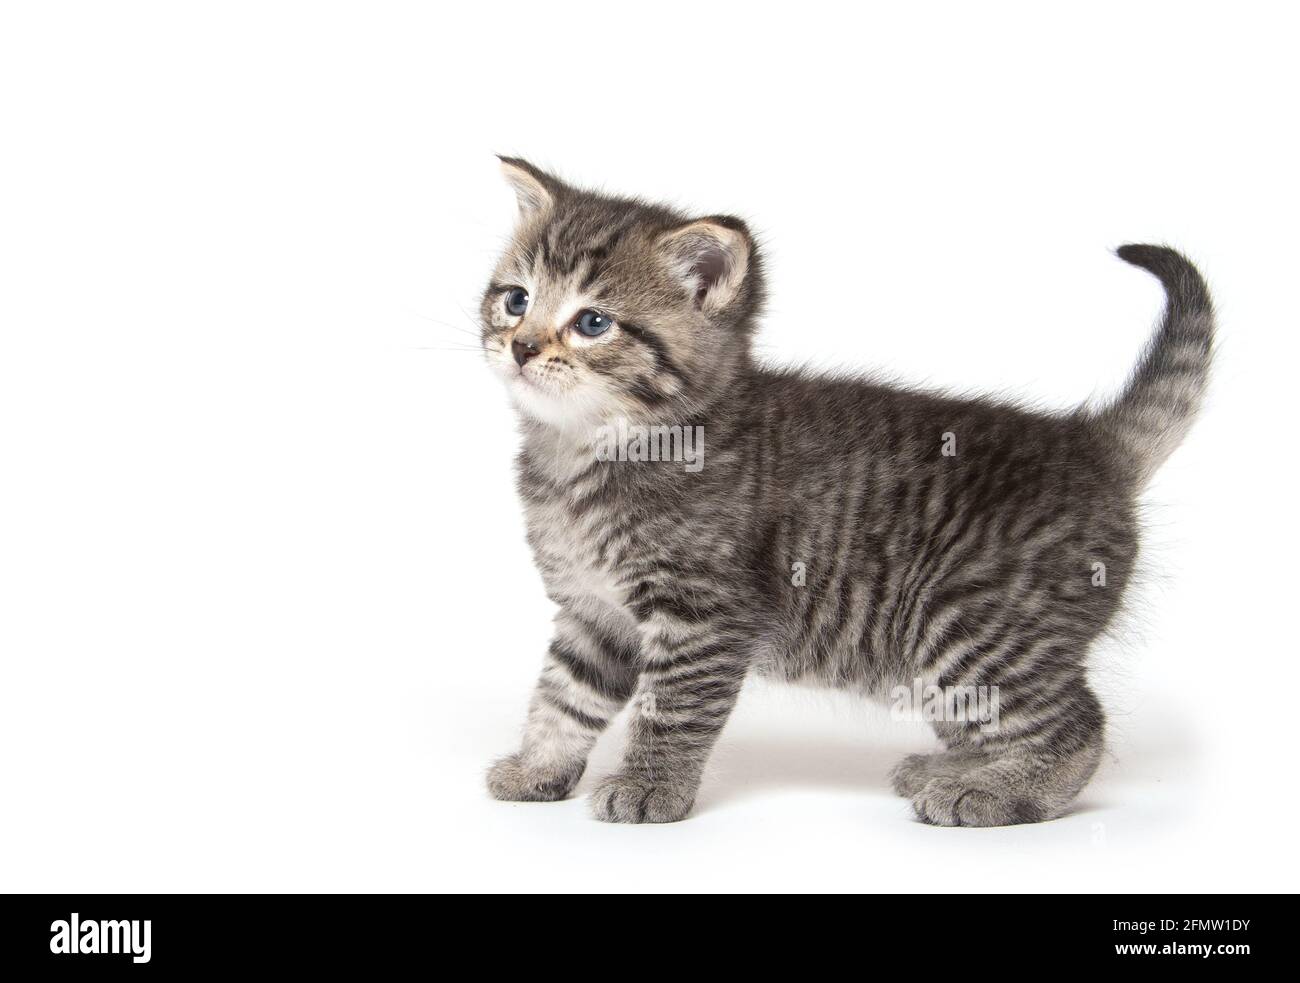 Cute baby tabby kitten isolated on white background Stock Photo